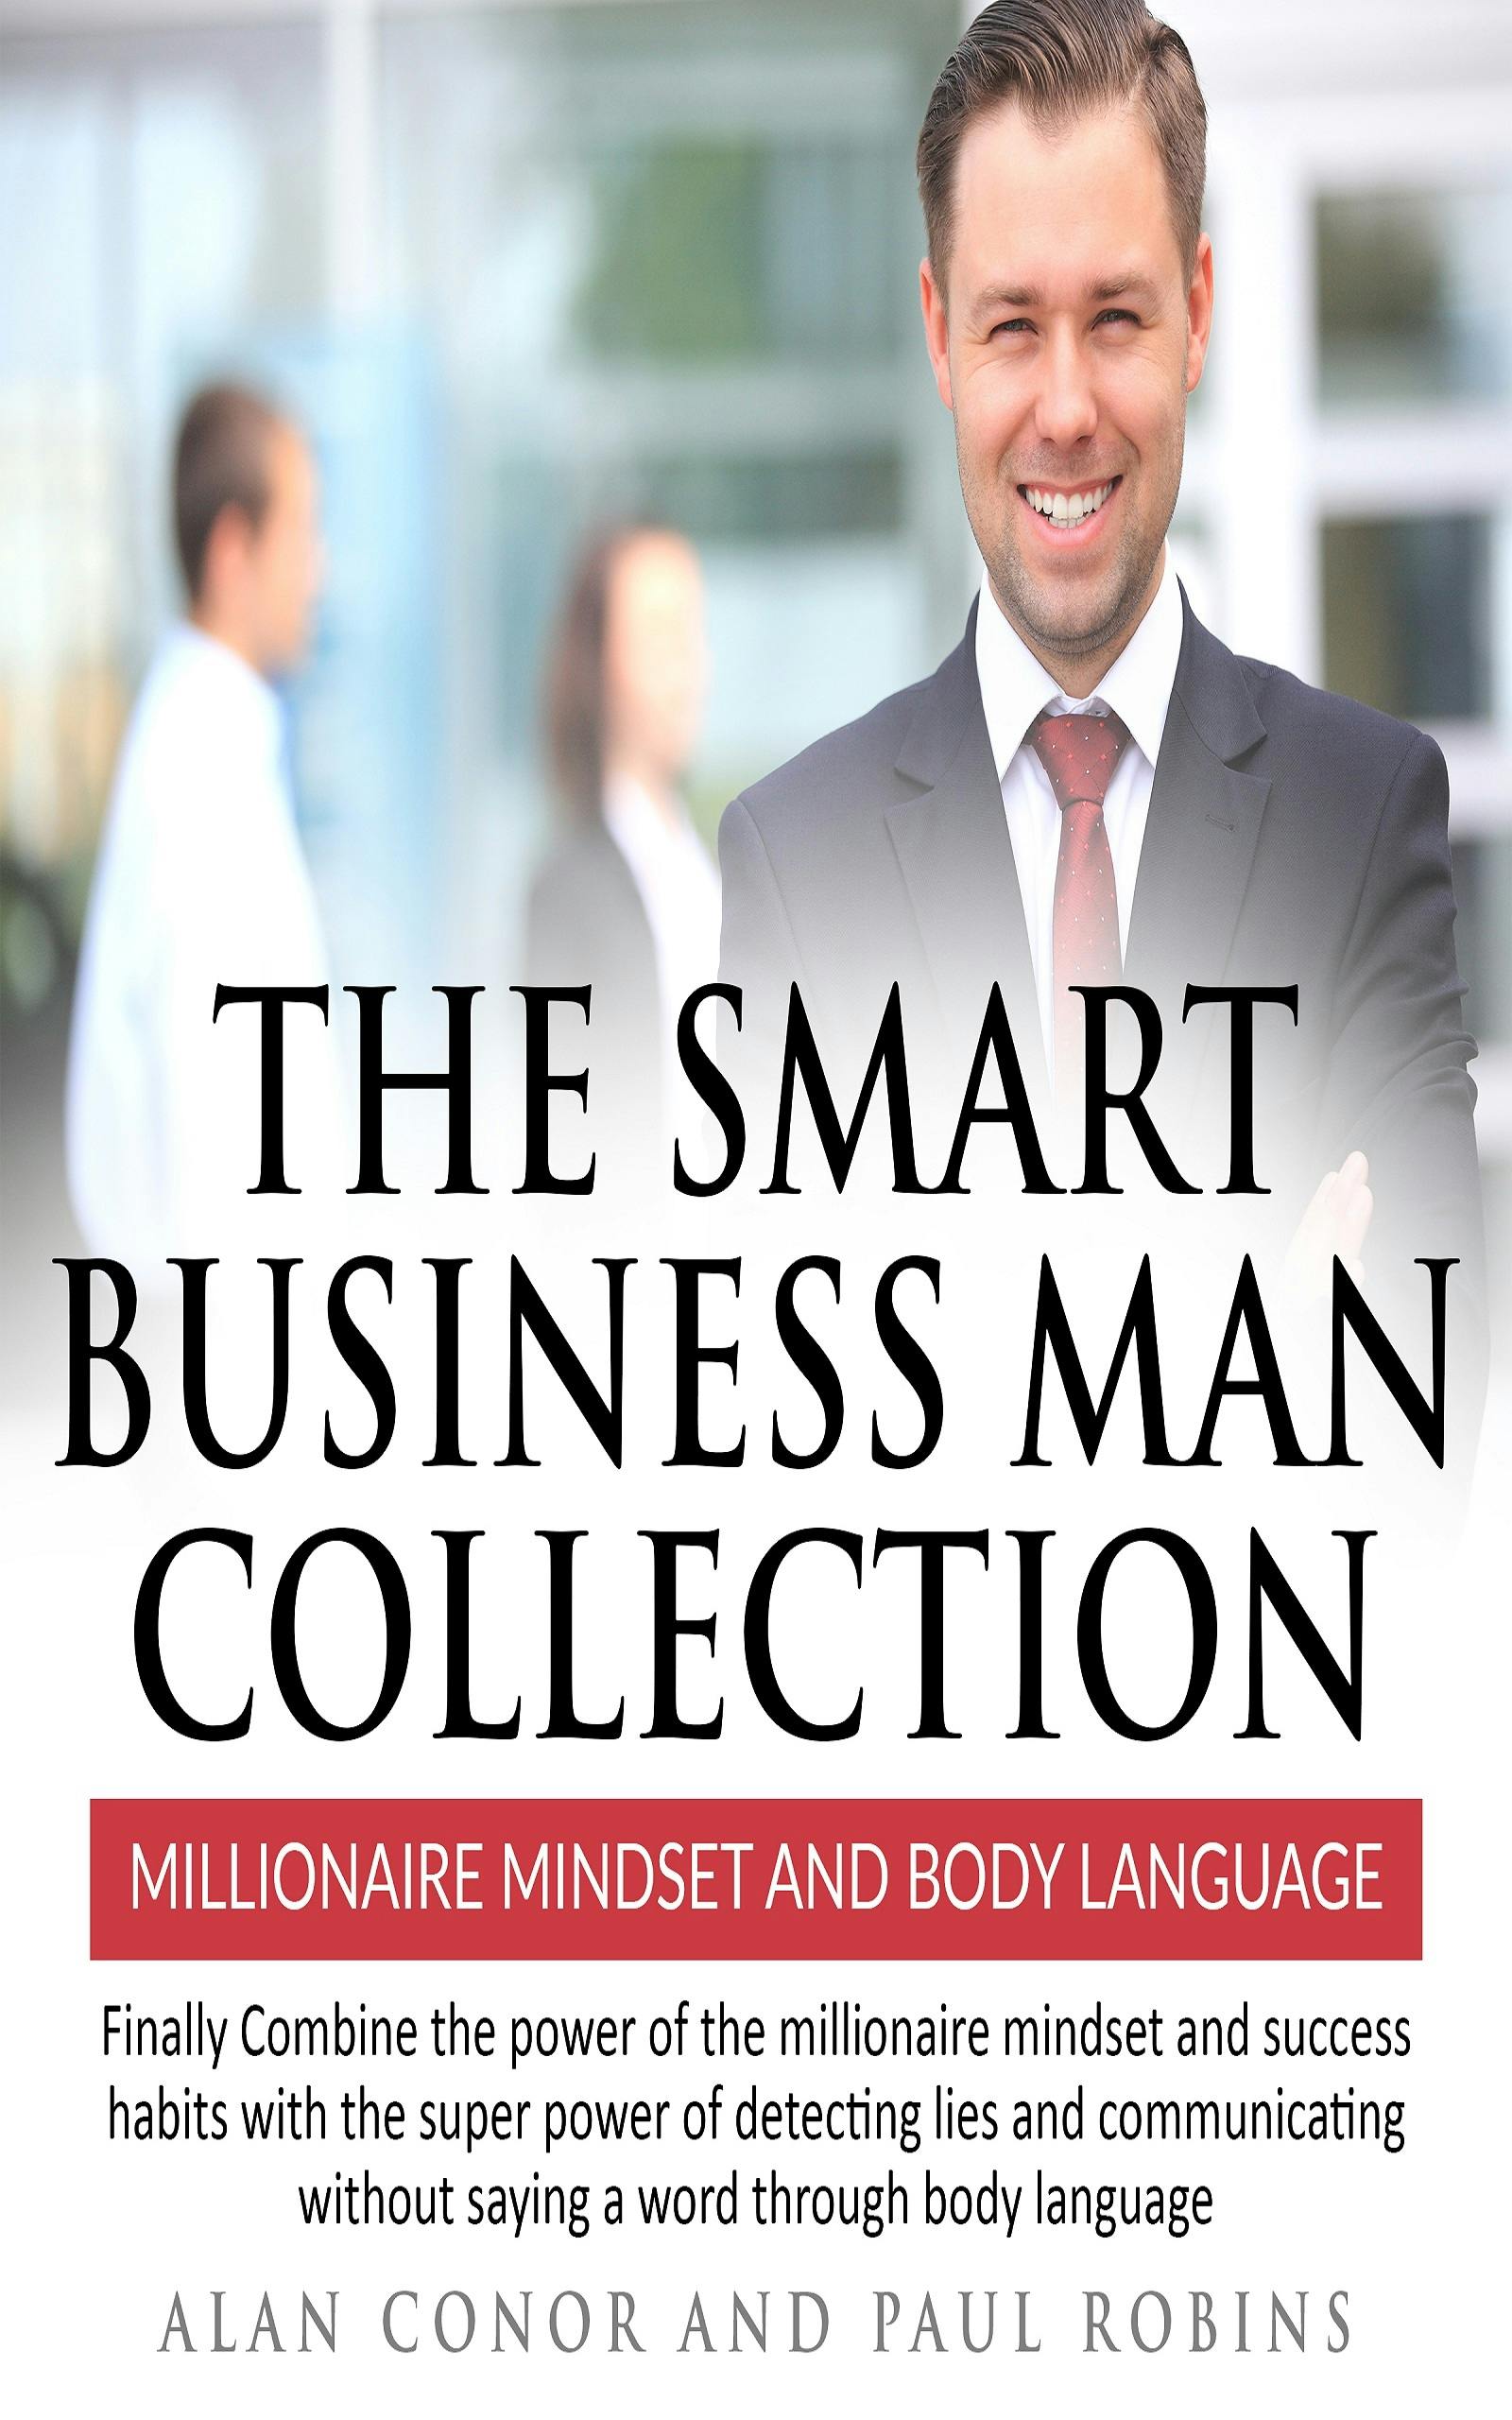 The Smart Business Man Collection-millionaire Mindset and Body Language - Paul Robins, Alan Conor